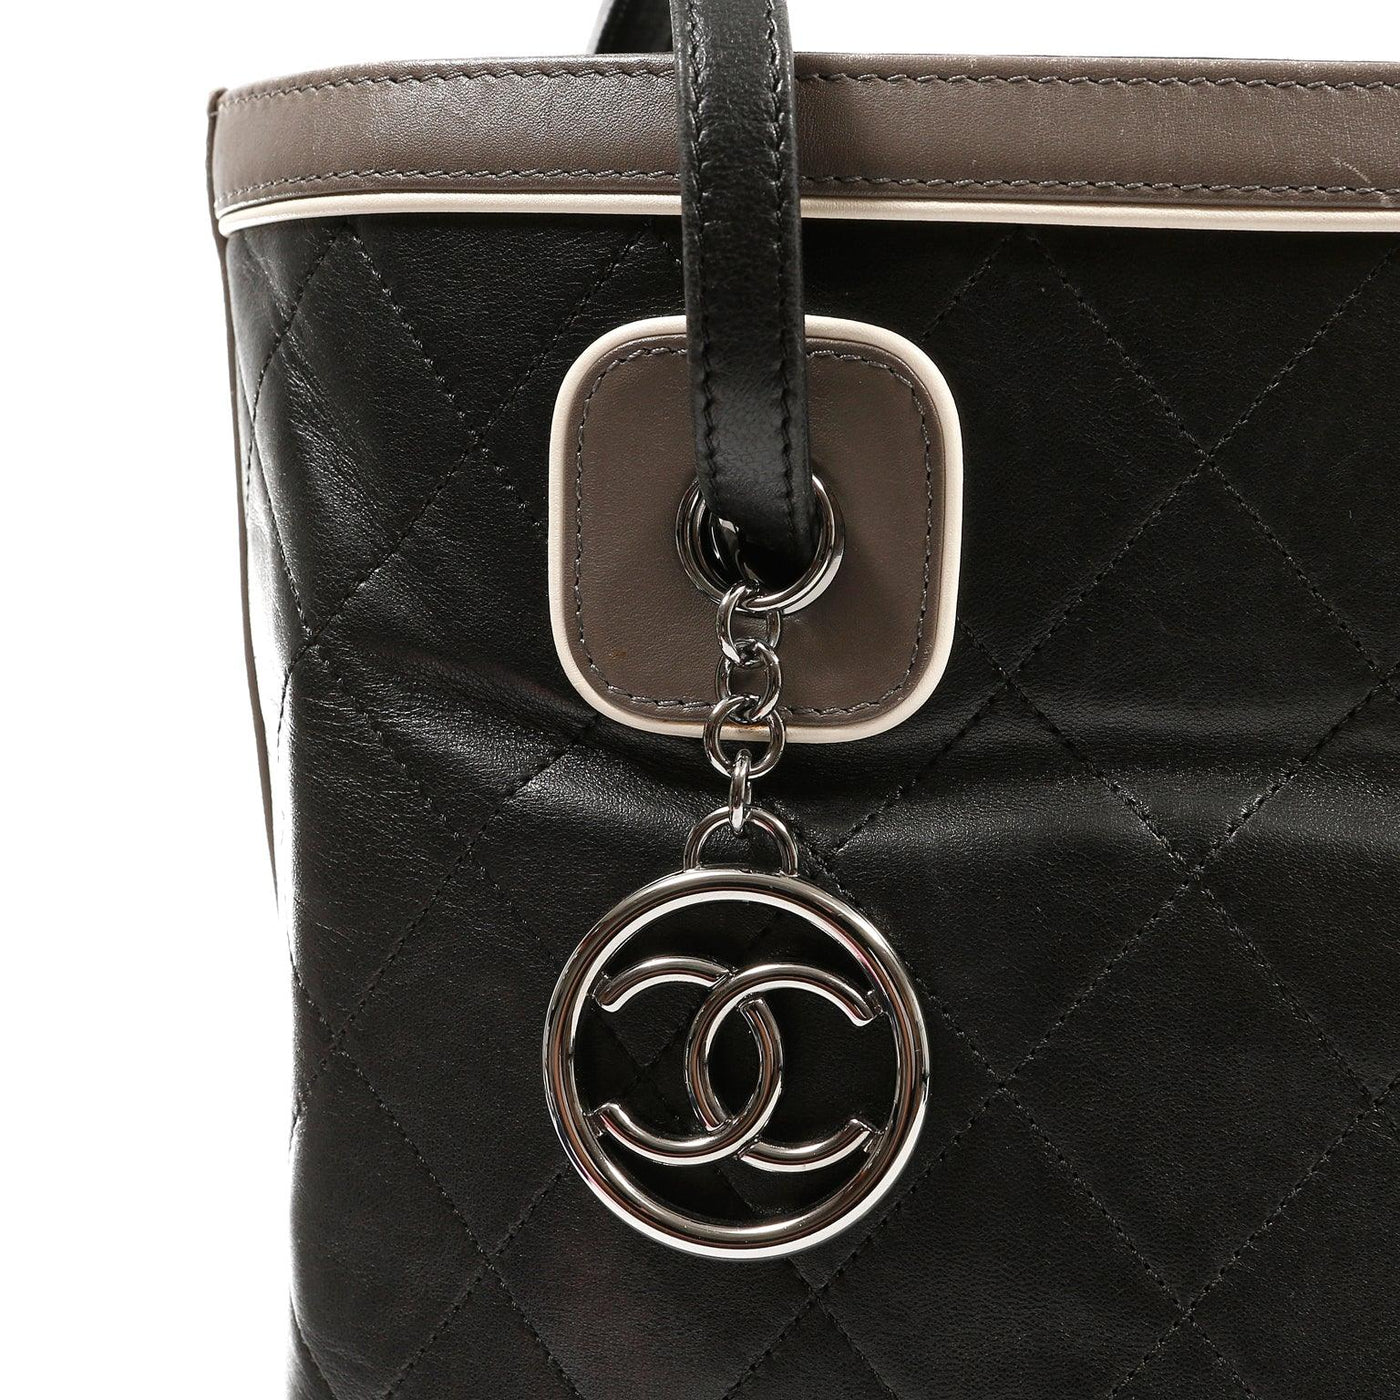 Chanel Black and Grey Quilted Leather Bucket Tote - Only Authentics